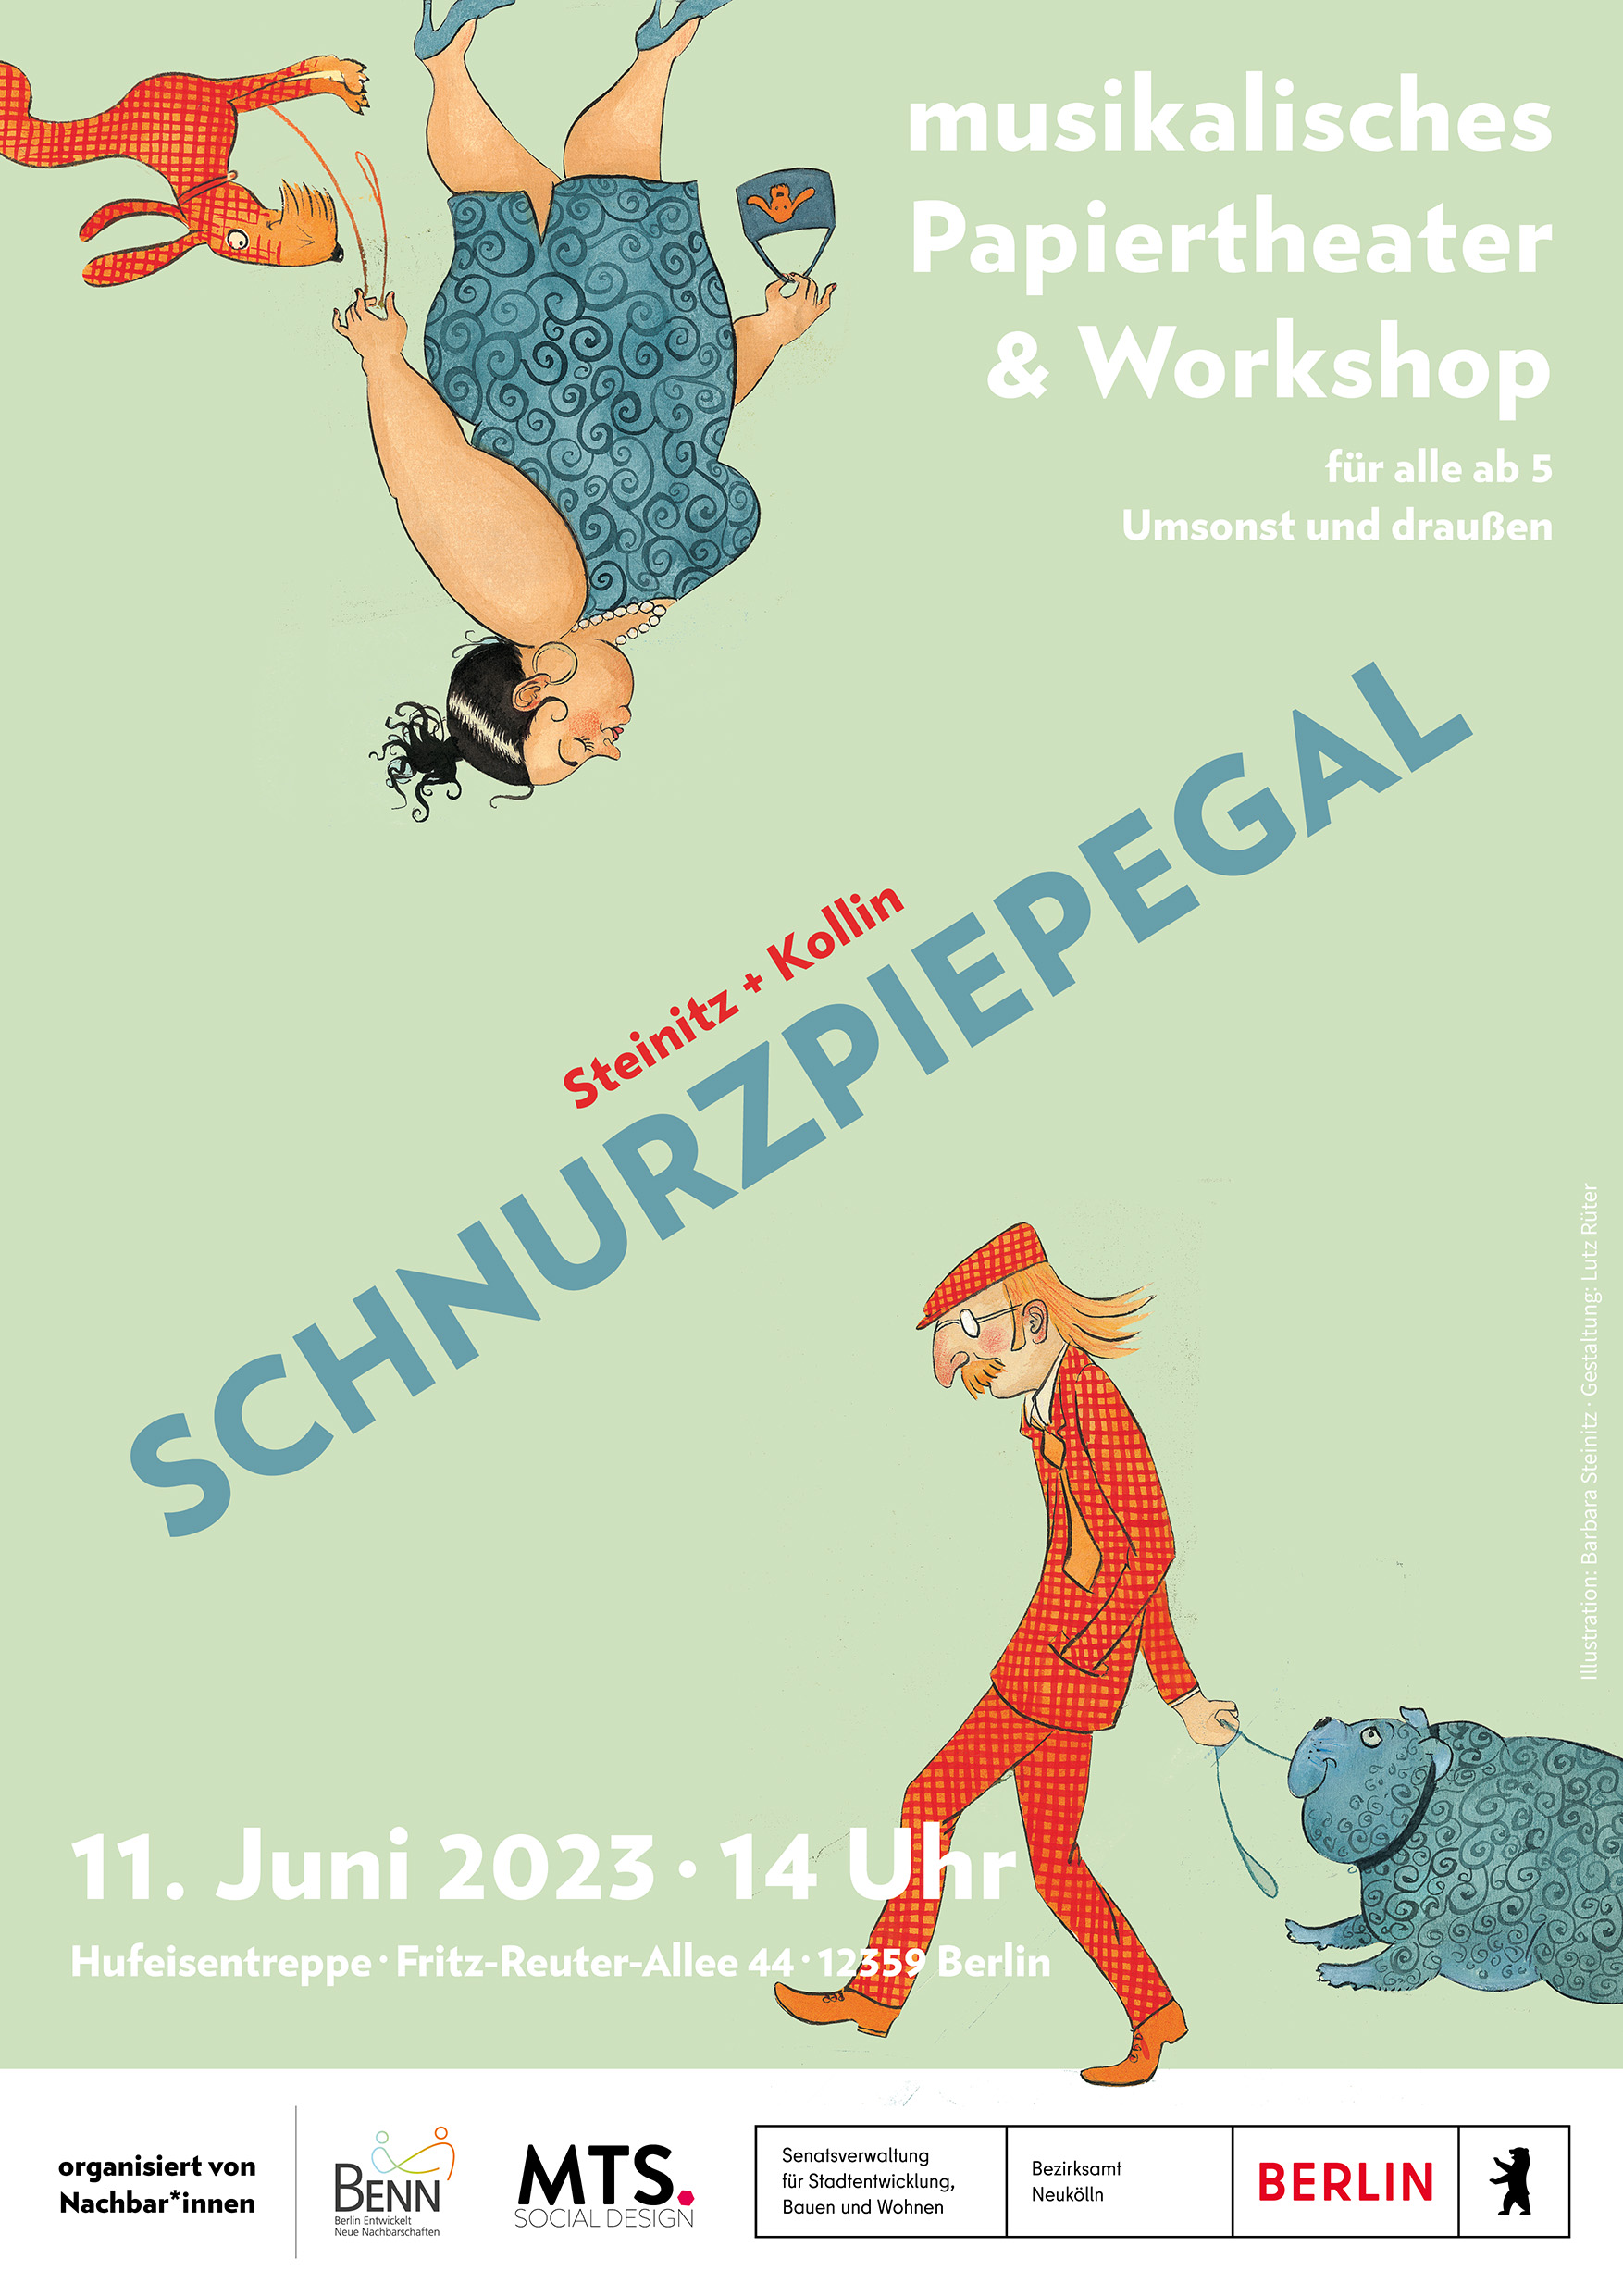 You are currently viewing  Schnurzpiepegal - Papiertheater mit Livemusik & Workshop